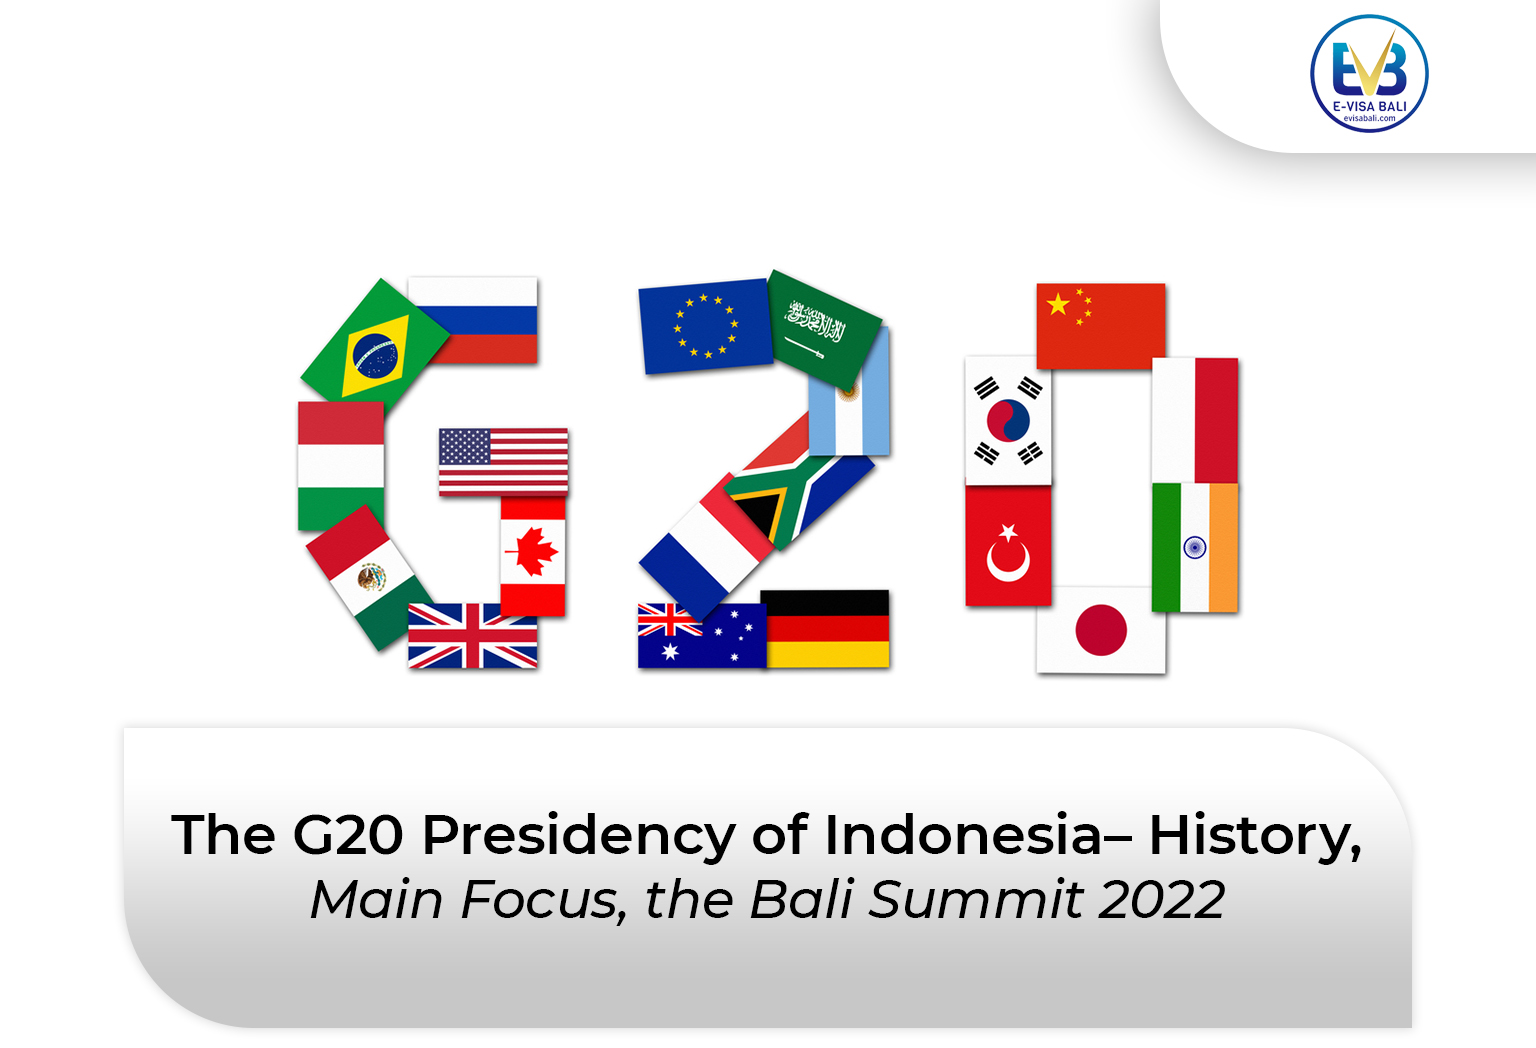 The G20 Presidency of Indonesia